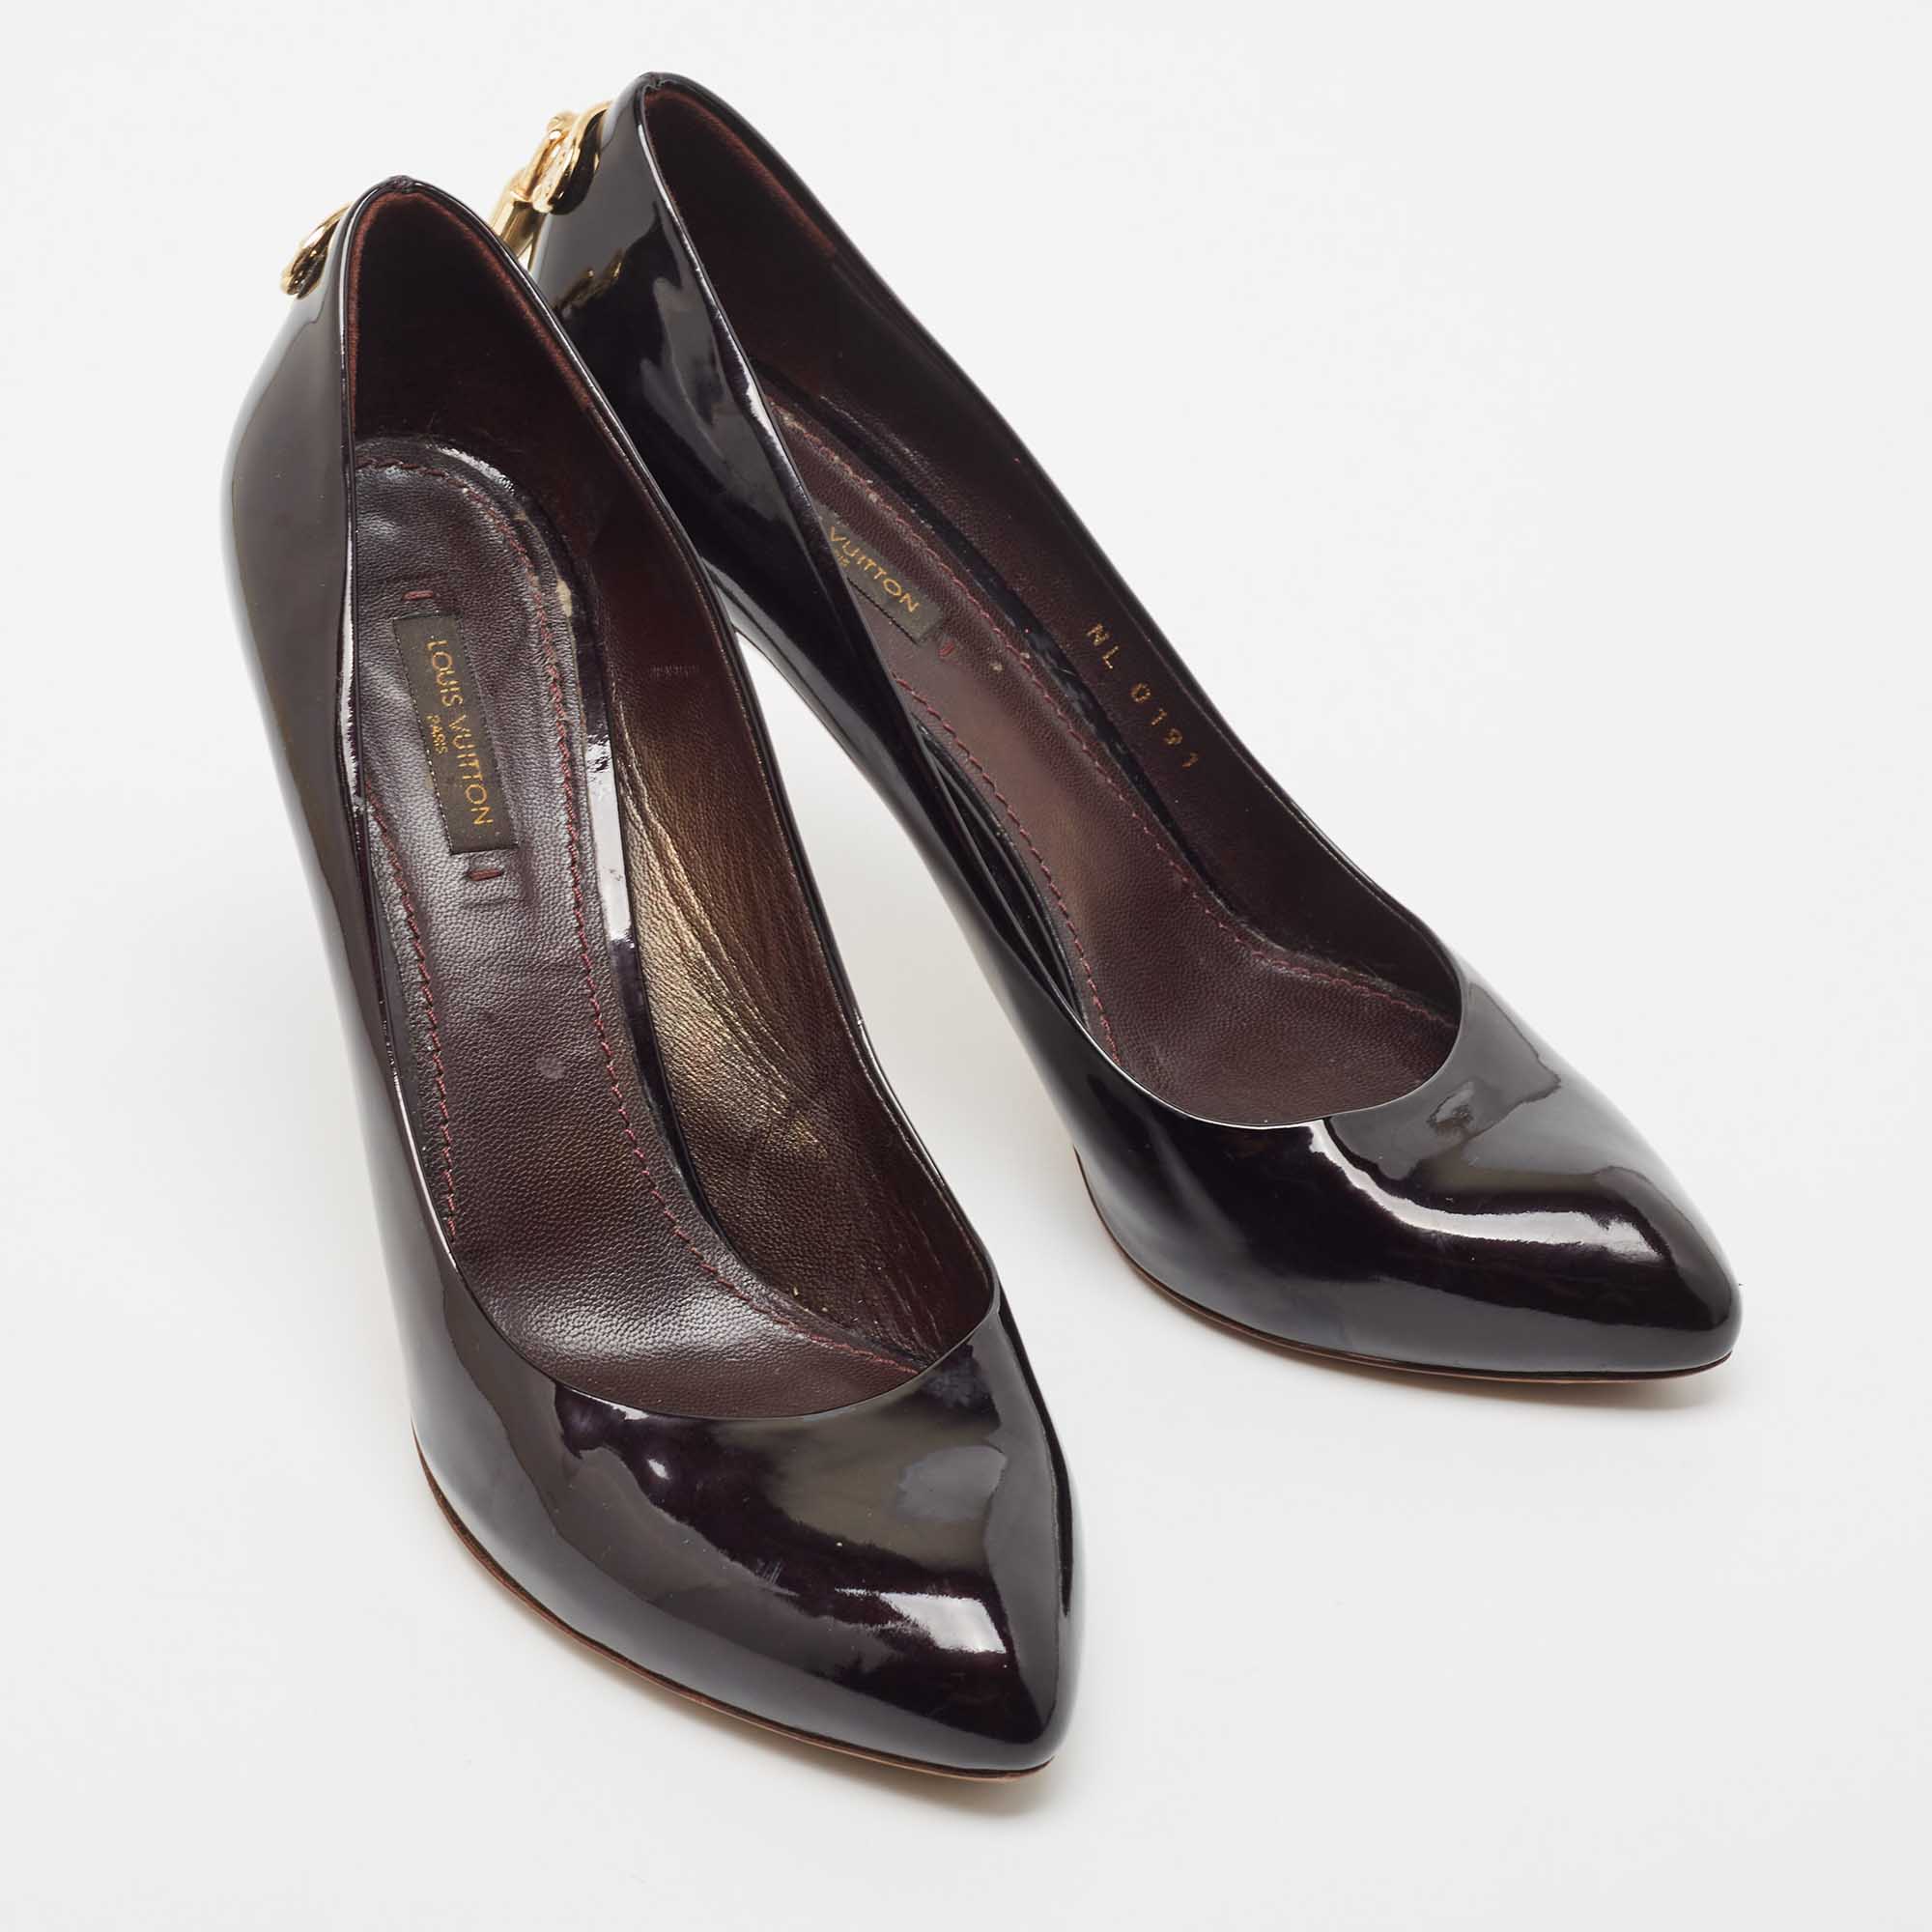 Louis Vuitton Burgundy Patent Leather Oh Really! Pumps Size 37